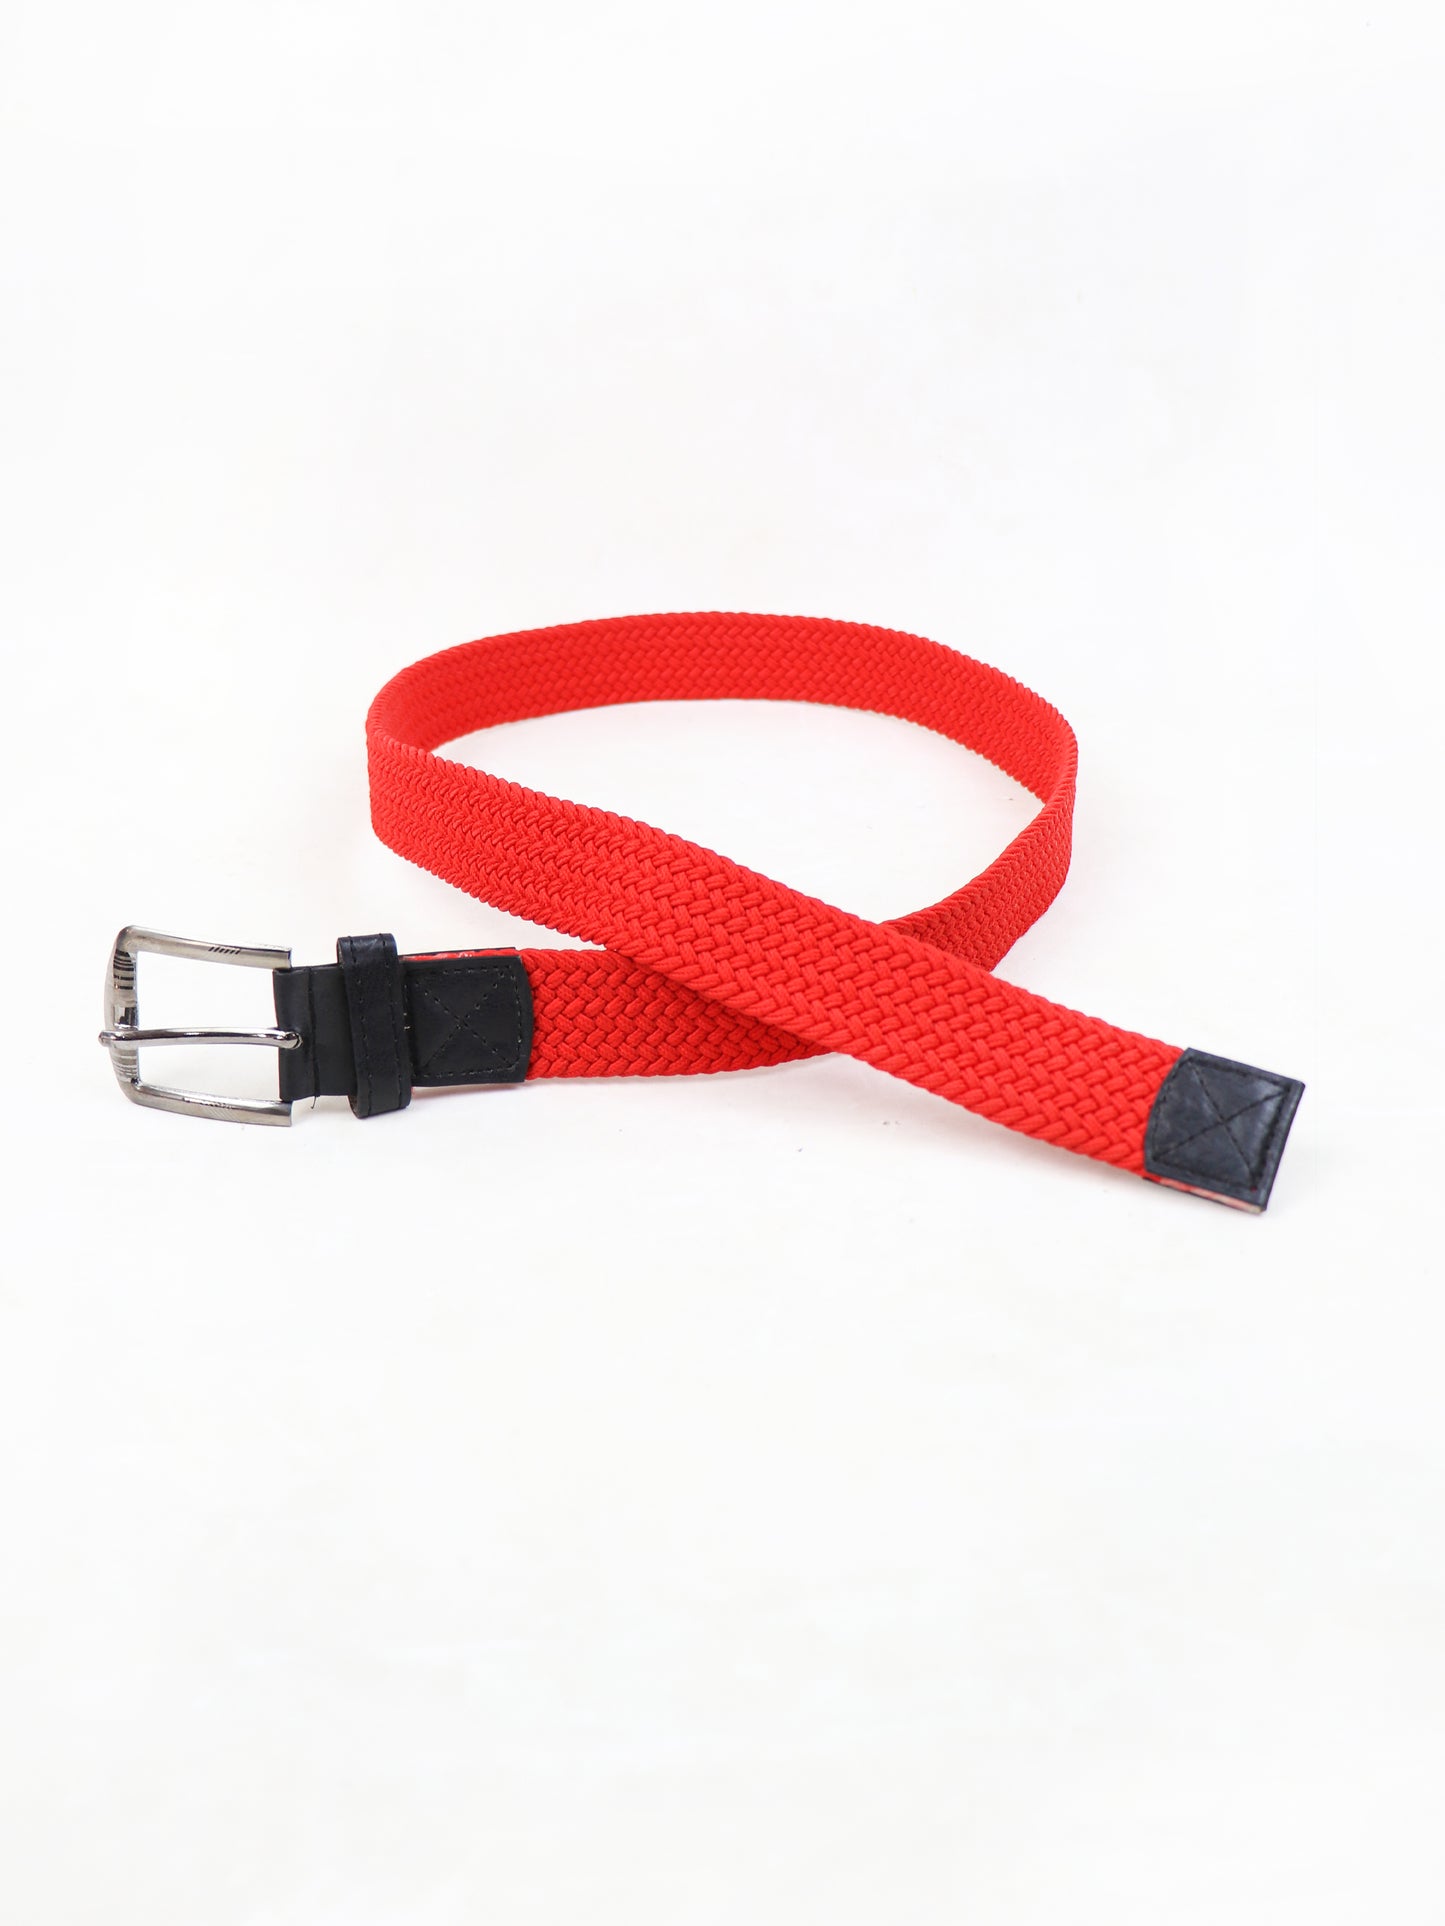 Men Canvas Elastic Fabric Woven Stretch Braided Belt Bright Red